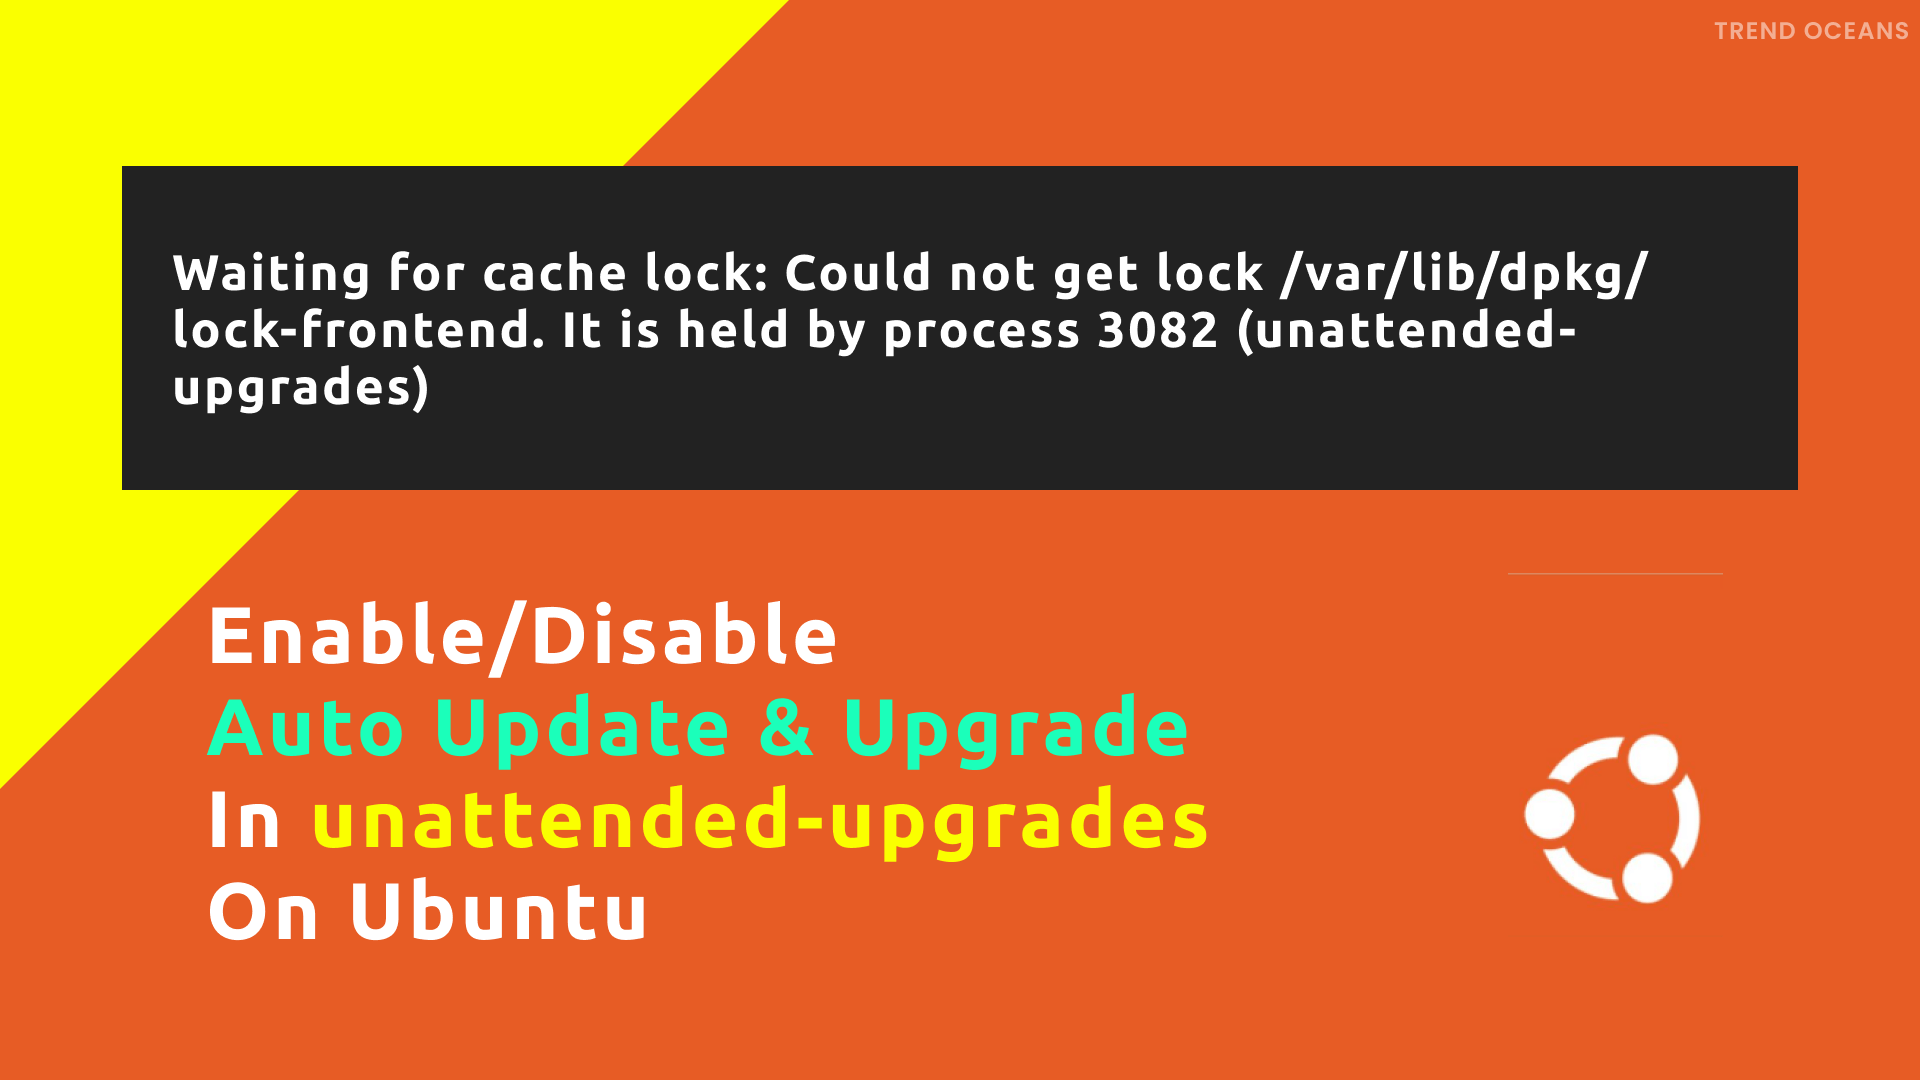 Enable/Disable Auto Update & Upgrade in Unattended Upgrades on Ubuntu